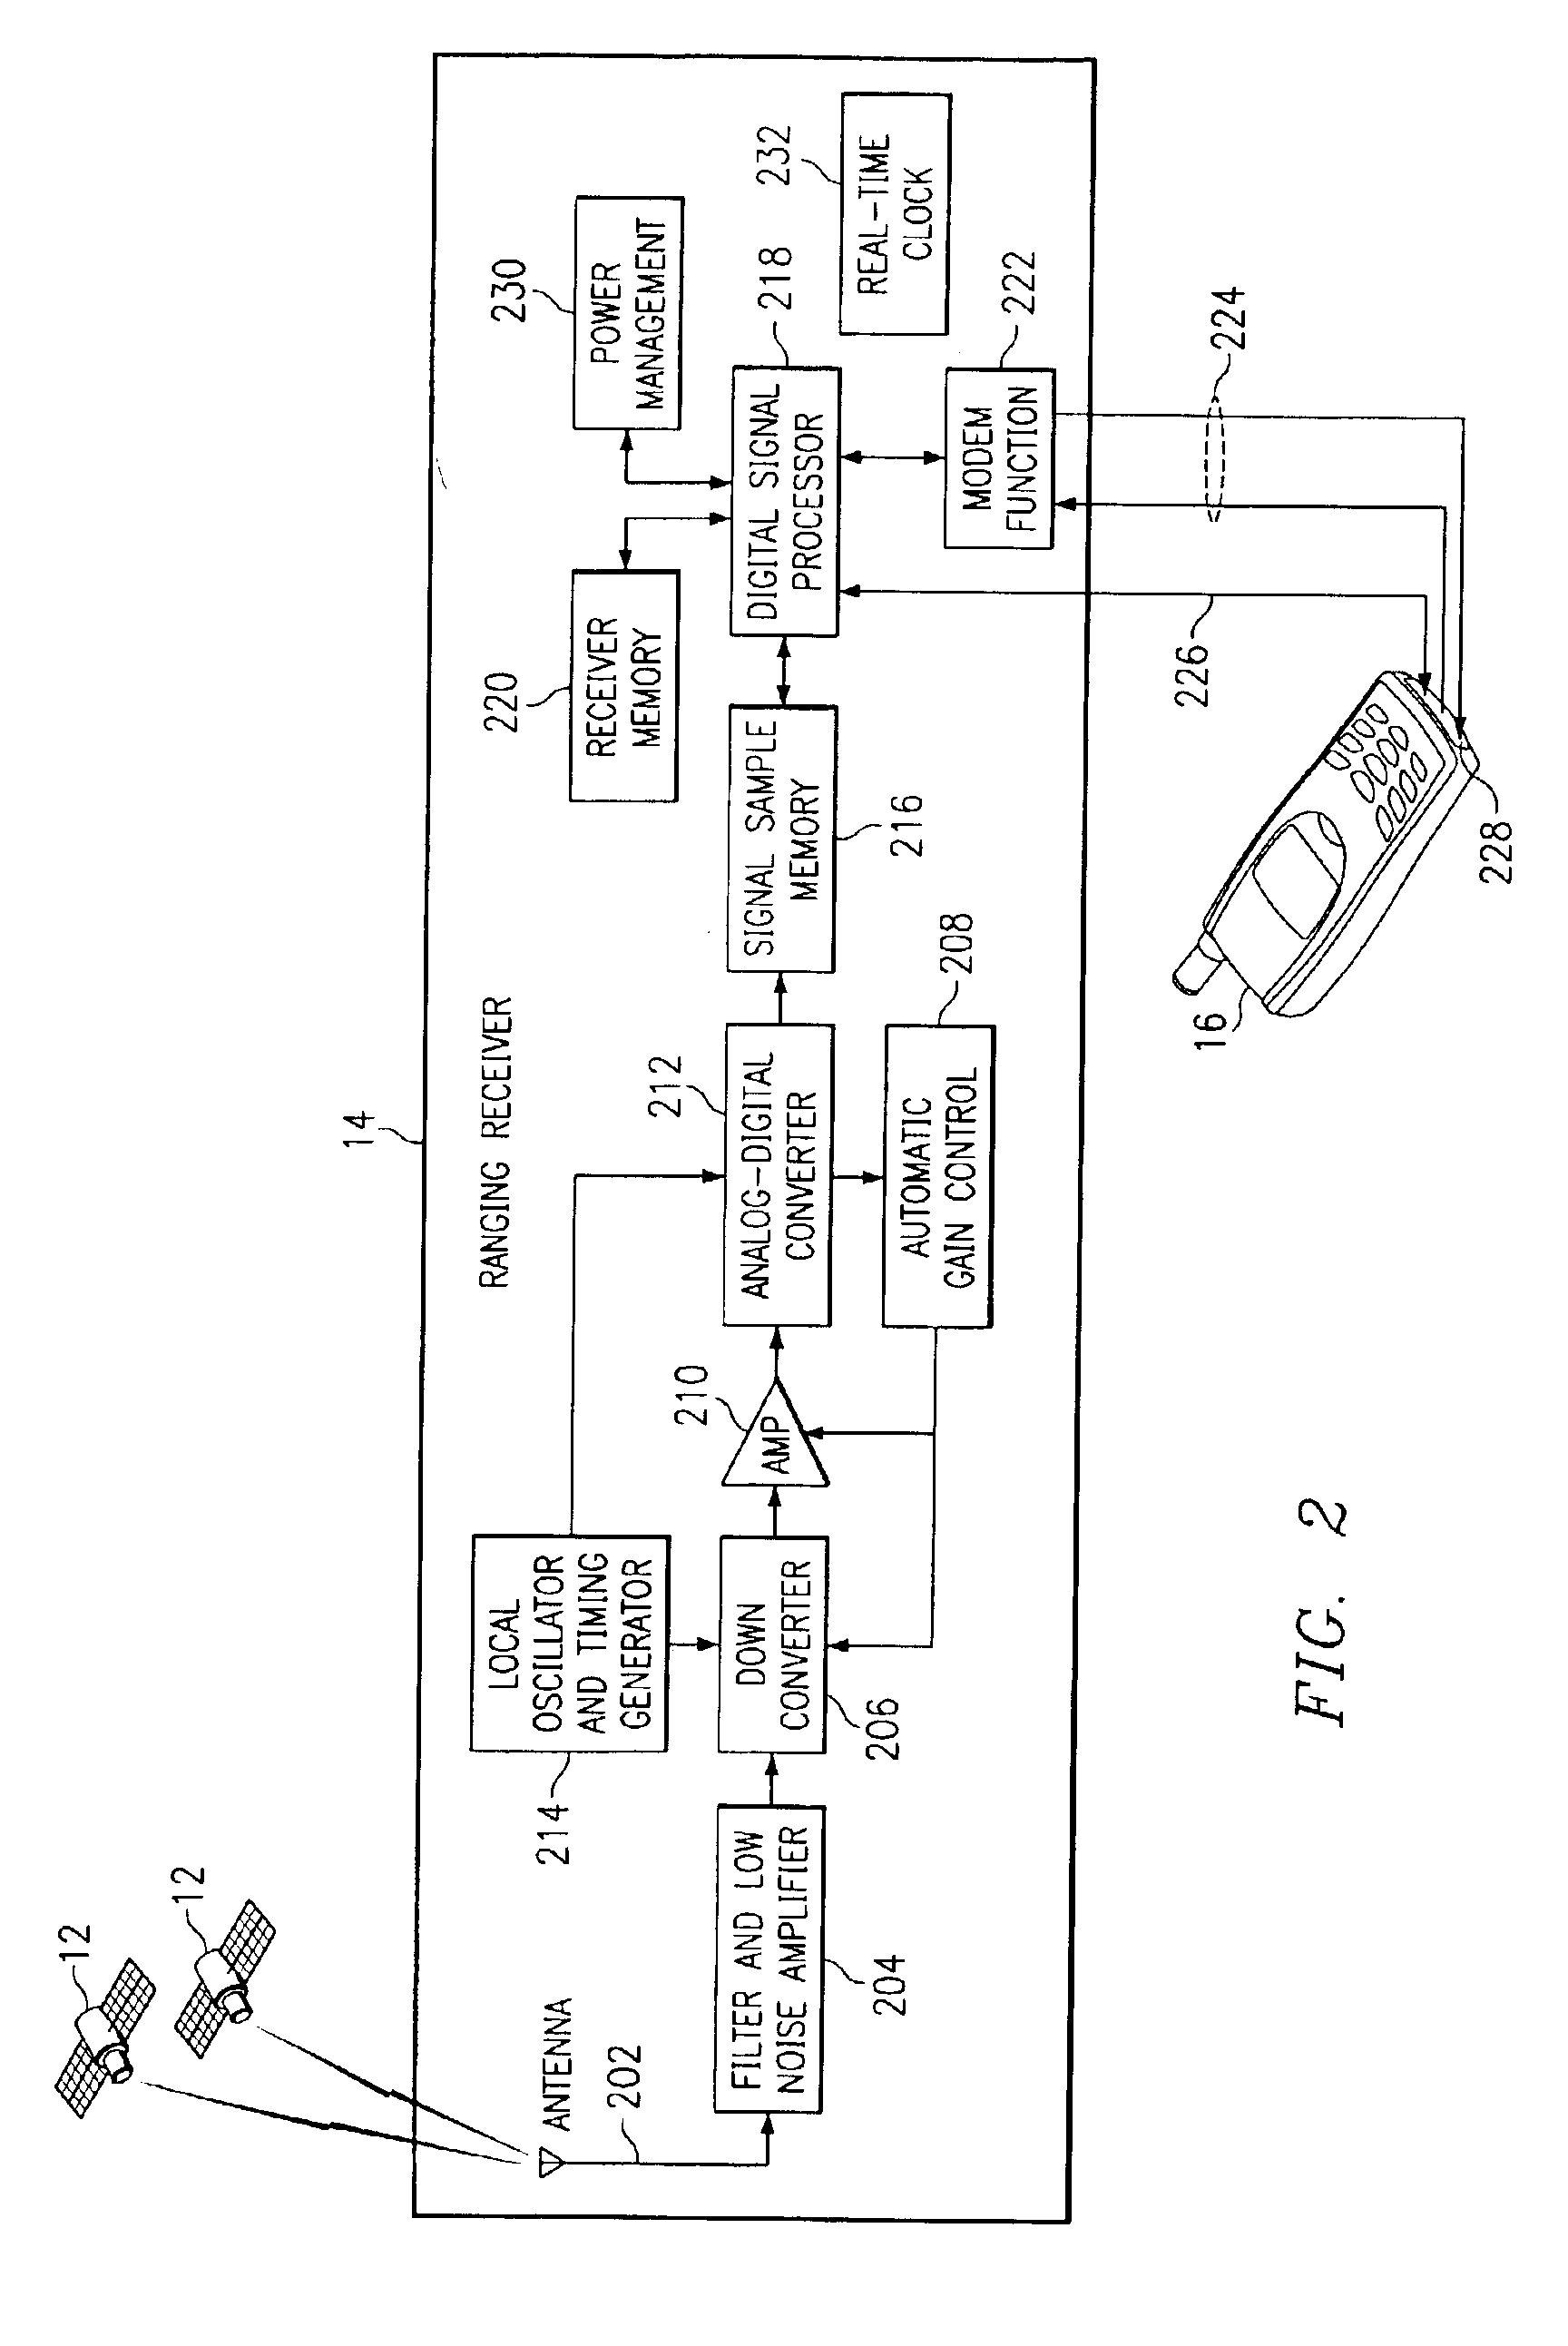 Method and system for processing positioning signals based on predetermined message data segment